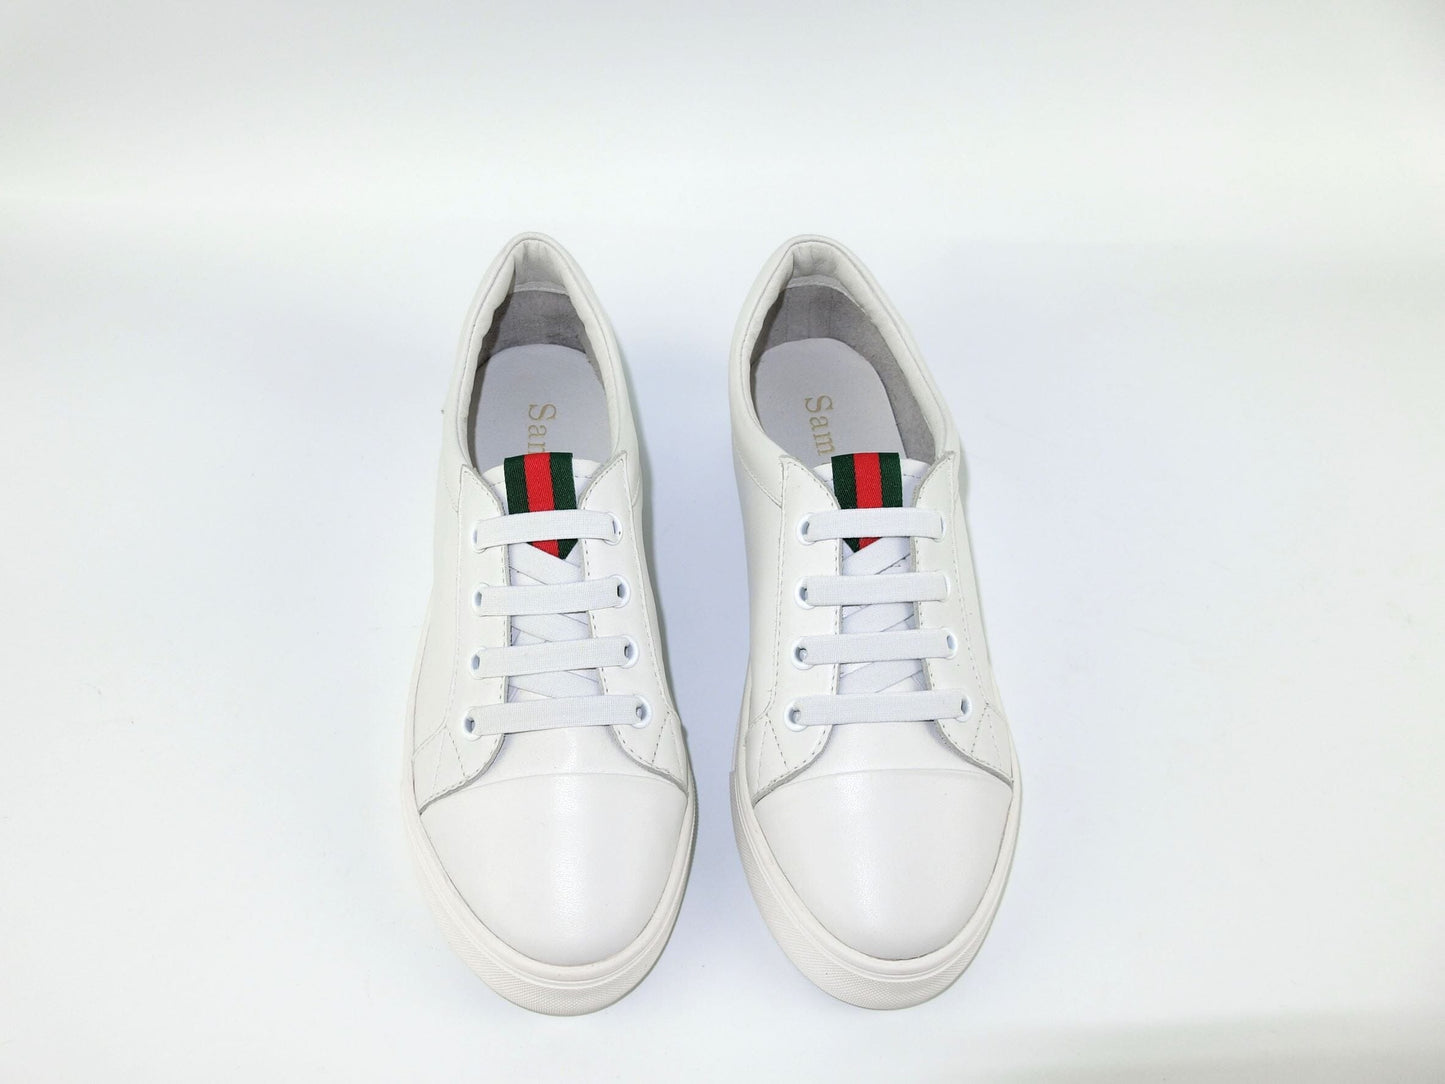 SS22004 Genuine leather sneakers with extra cushions - White with Green/Red ribbons sneakers Sam Star Shoes 